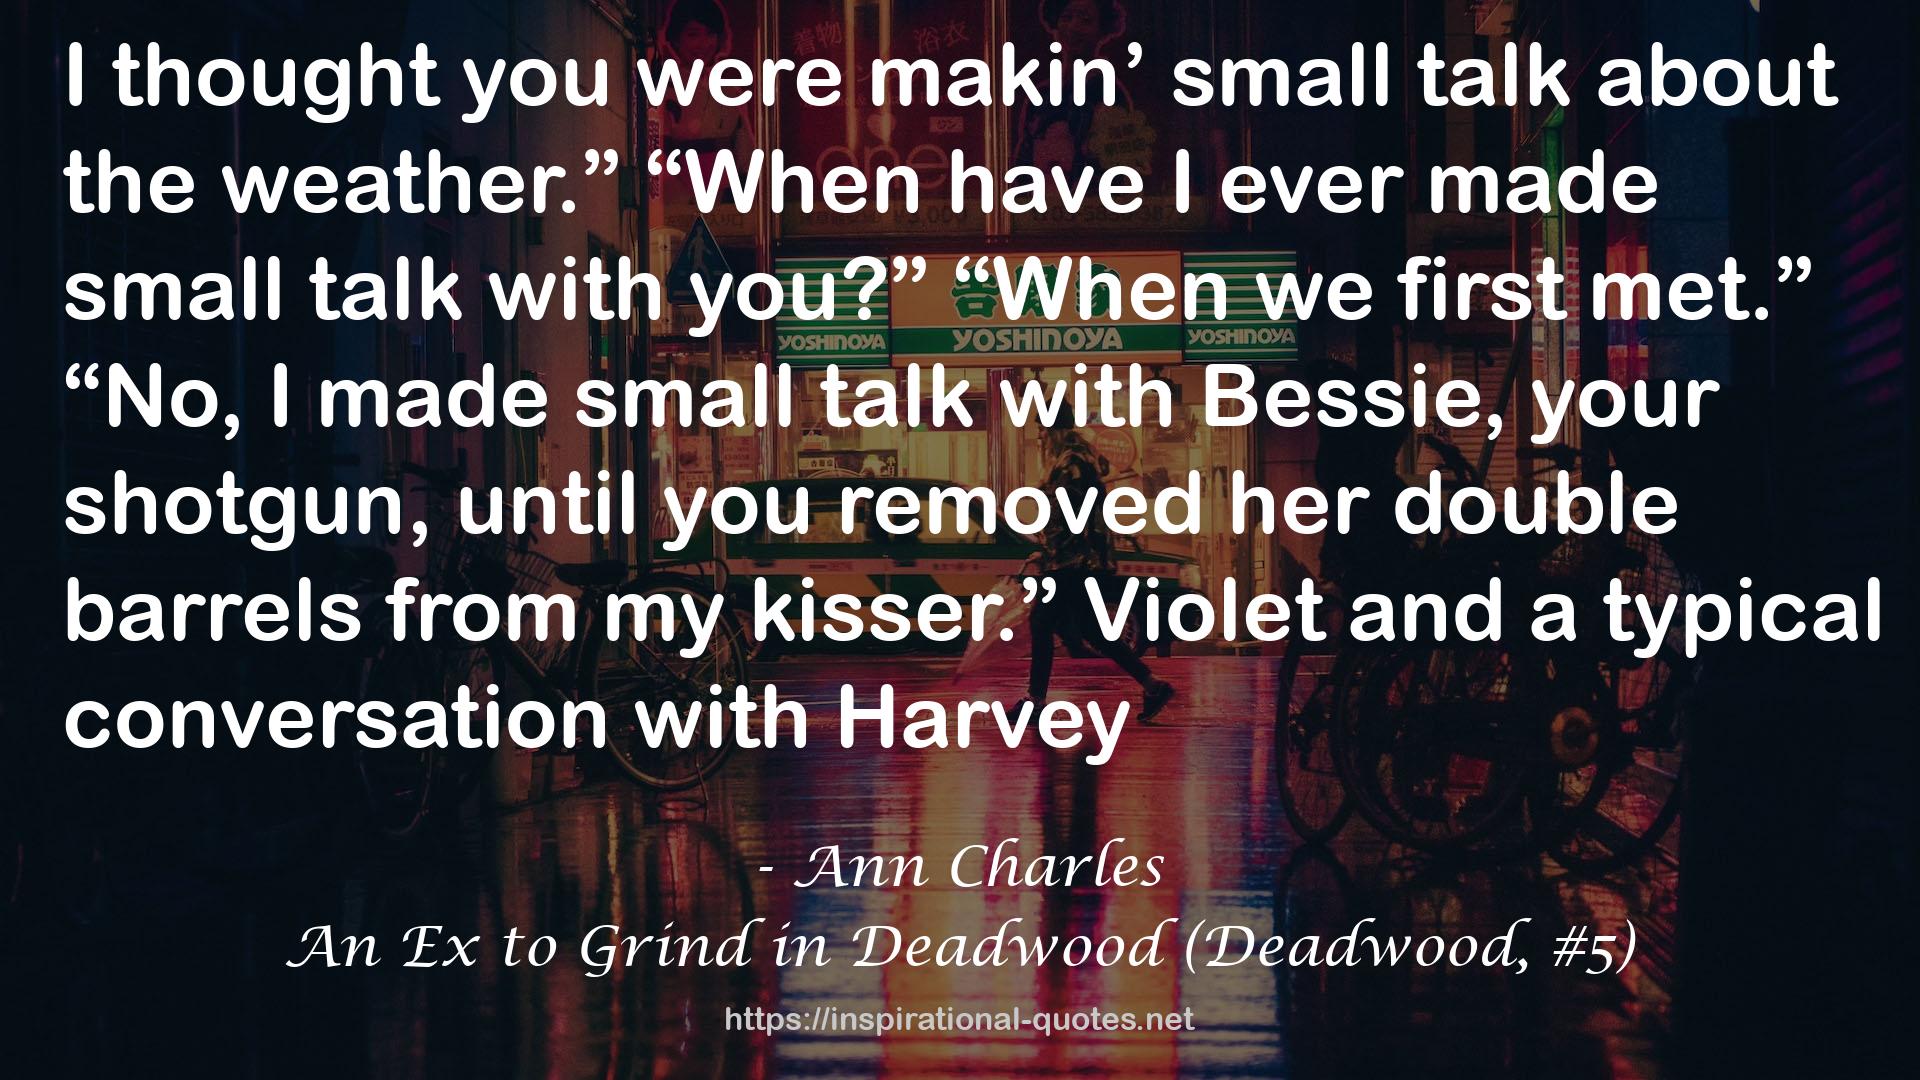 An Ex to Grind in Deadwood (Deadwood, #5) QUOTES